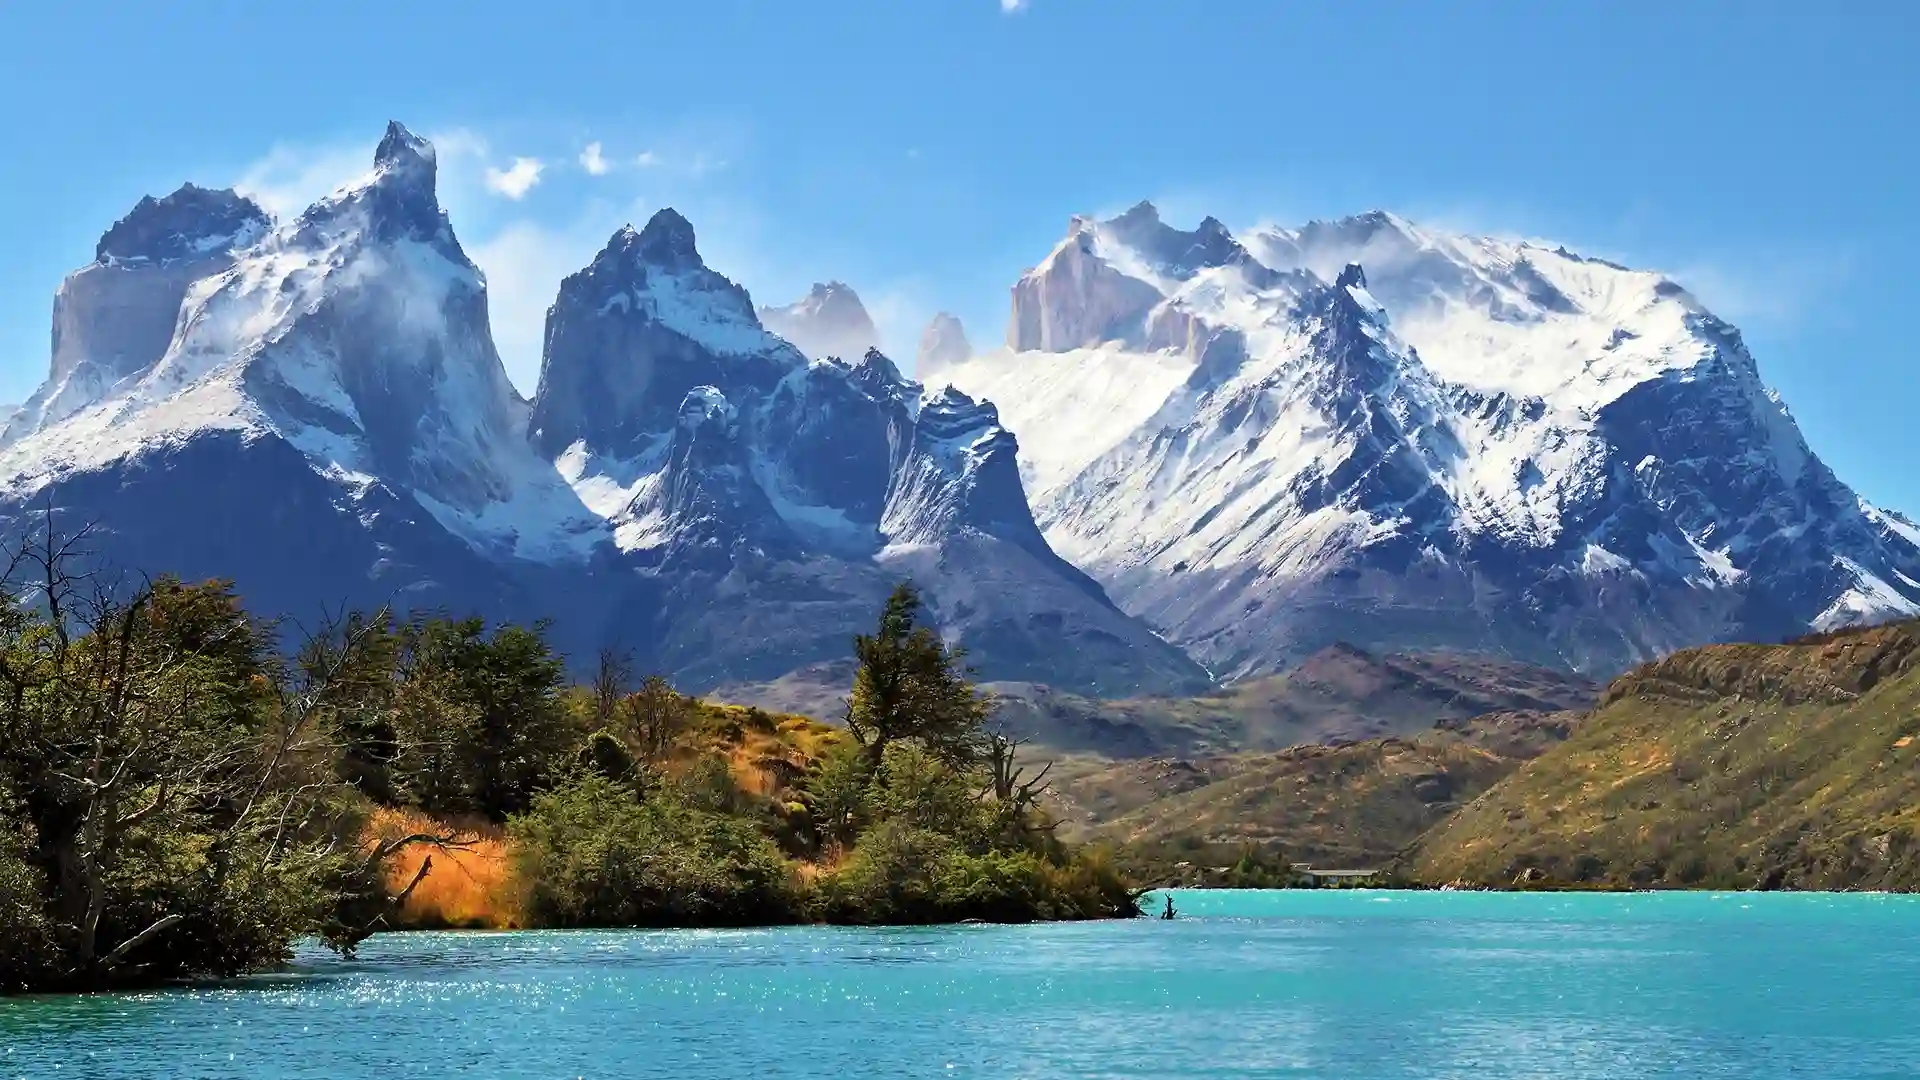 View of snowcapped mountains with green vegetation and water in the valley at Torres del Paine National Park in South America.